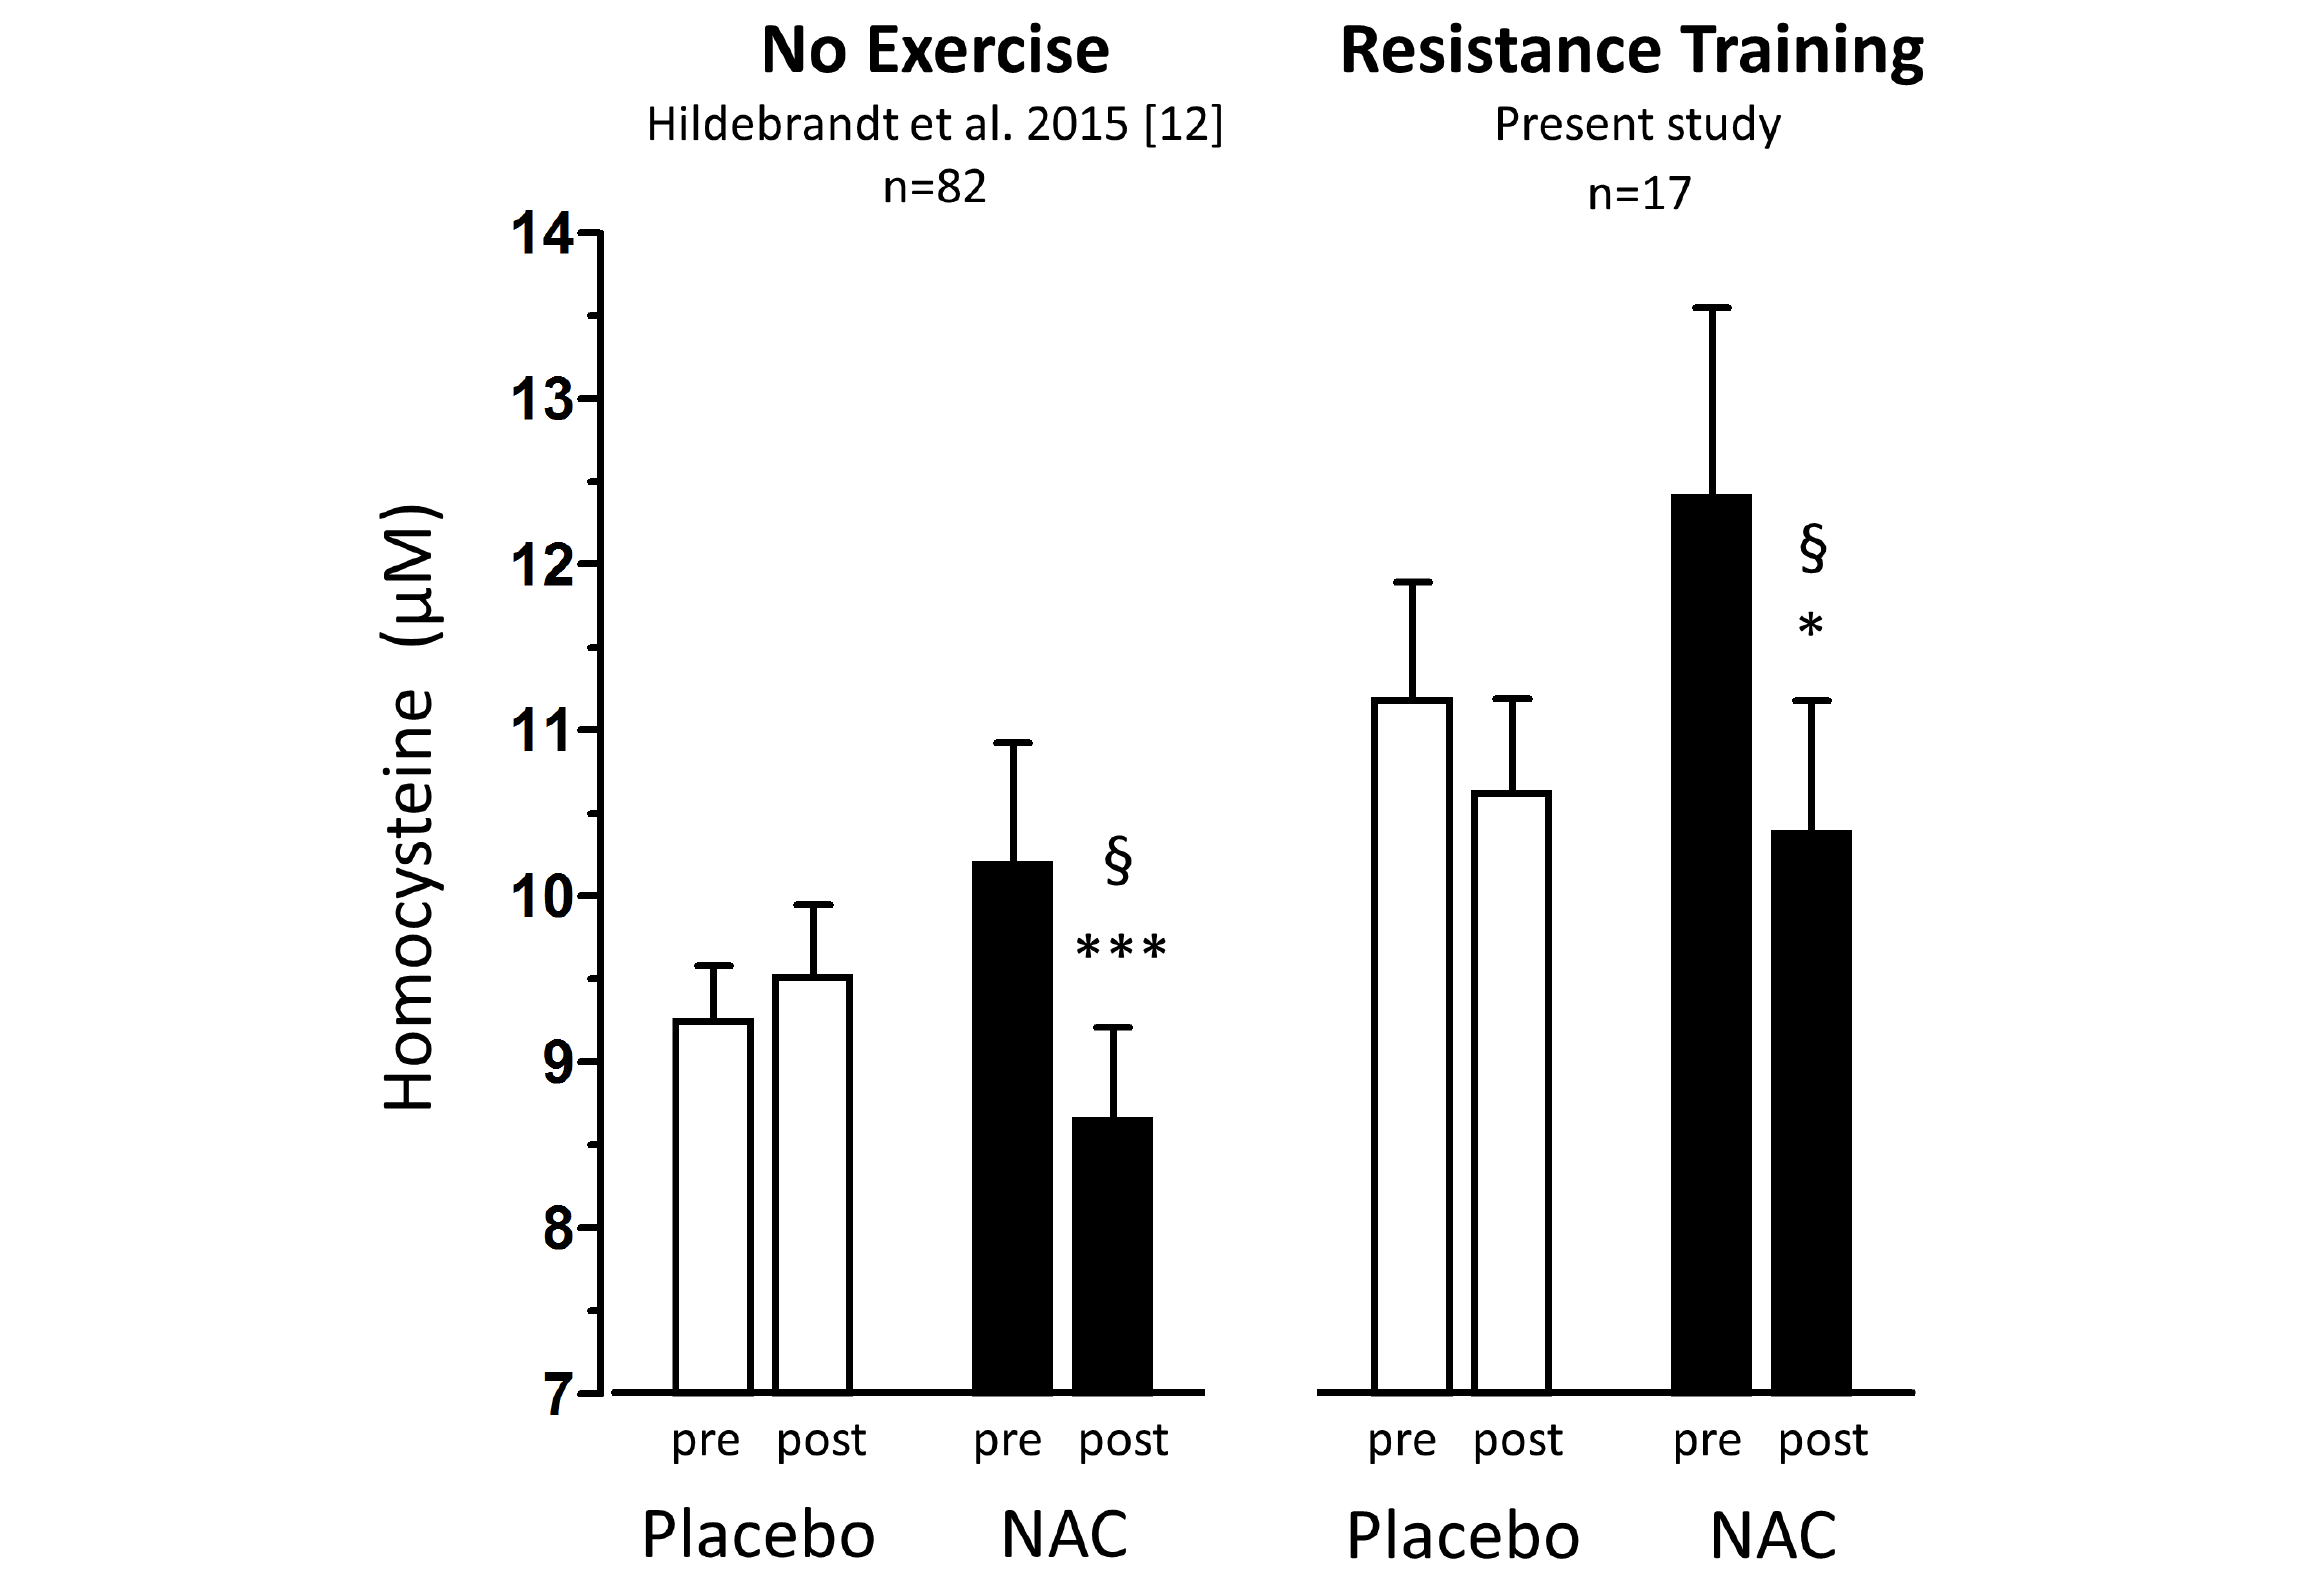 Figure 1 Total homocysteine plasma levels (tHcy) before and after 1.8g/d oral NAC or placebo treatment of non-exercising subjects (previous study (12), left panel,n=82) and of subjects undergoing anabolic resistance training (present study, right panel, n=17) 